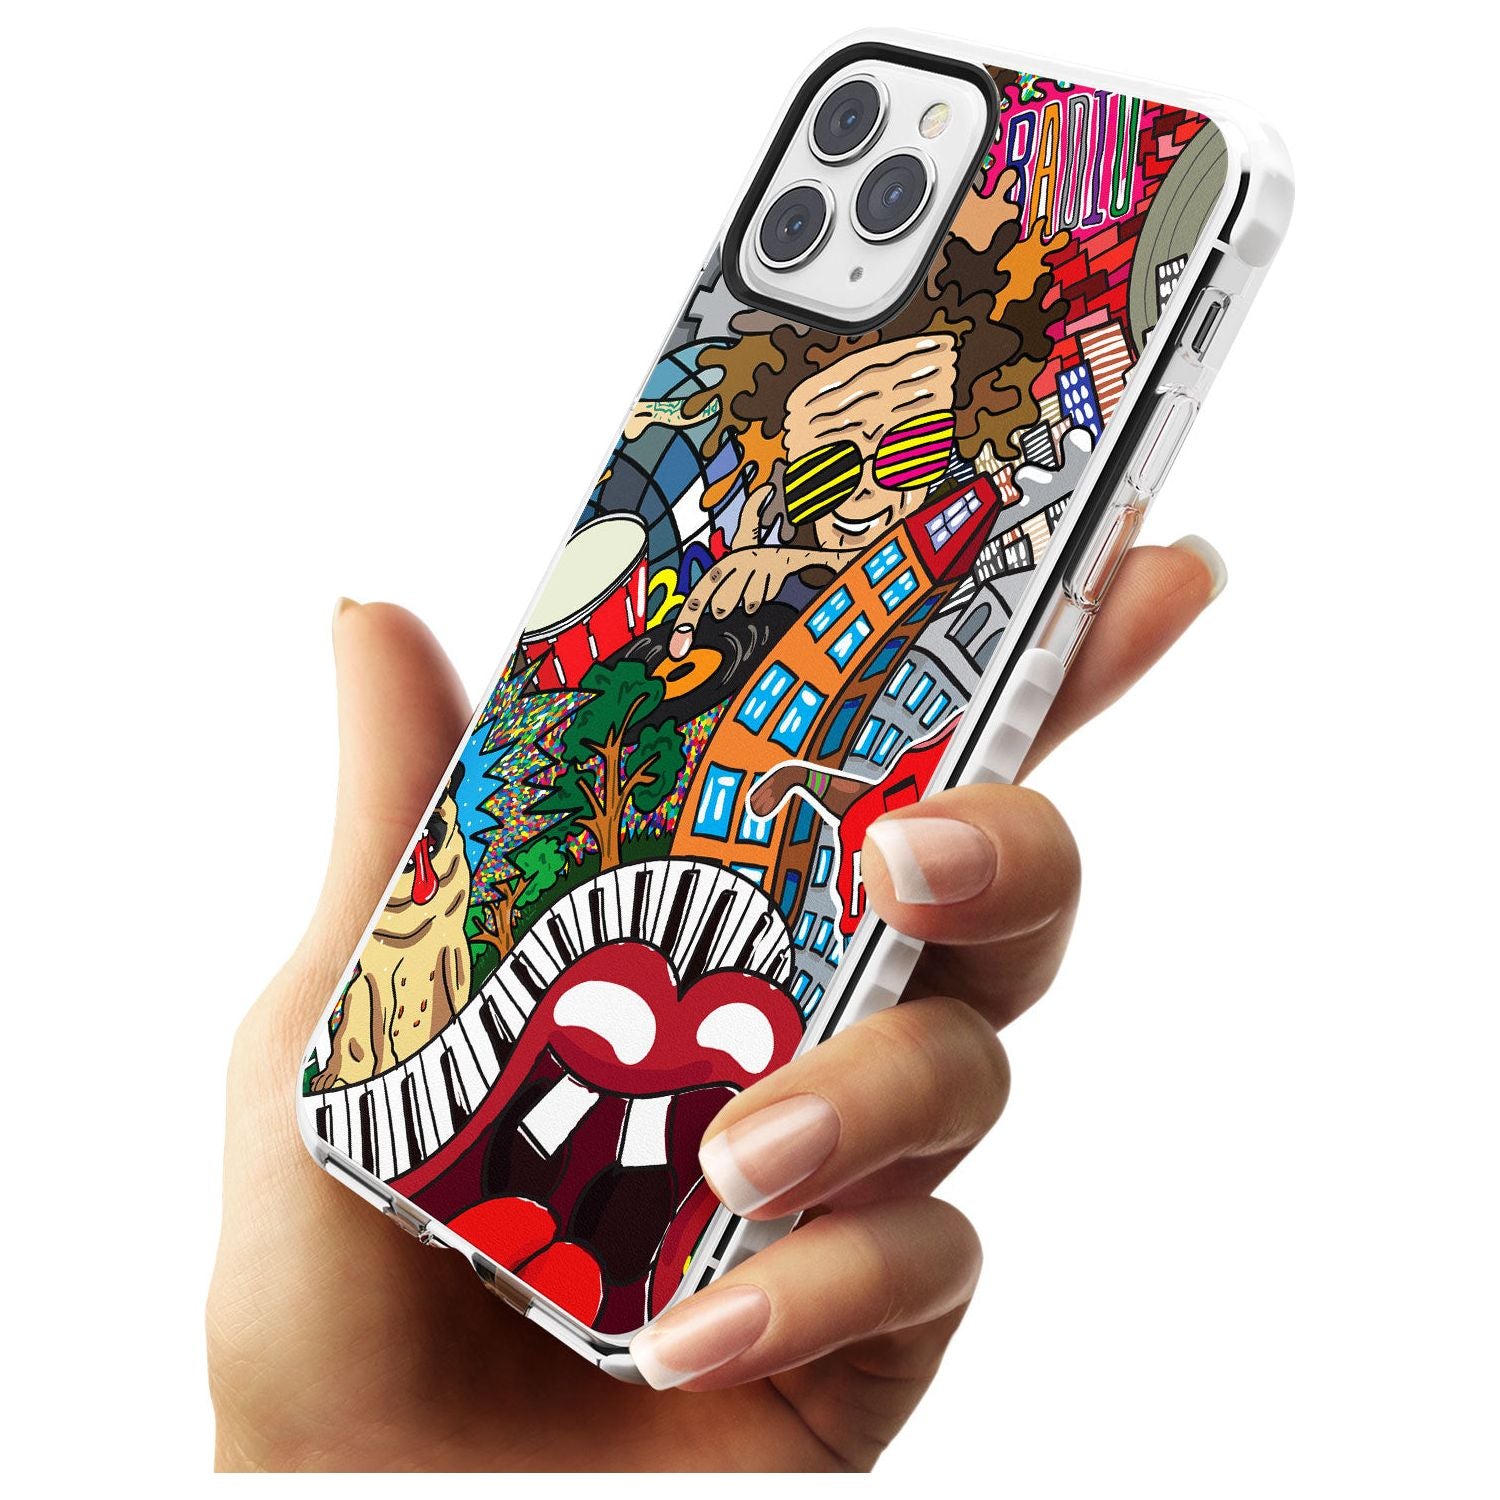 Noise Complaint Slim TPU Phone Case for iPhone 11 Pro Max